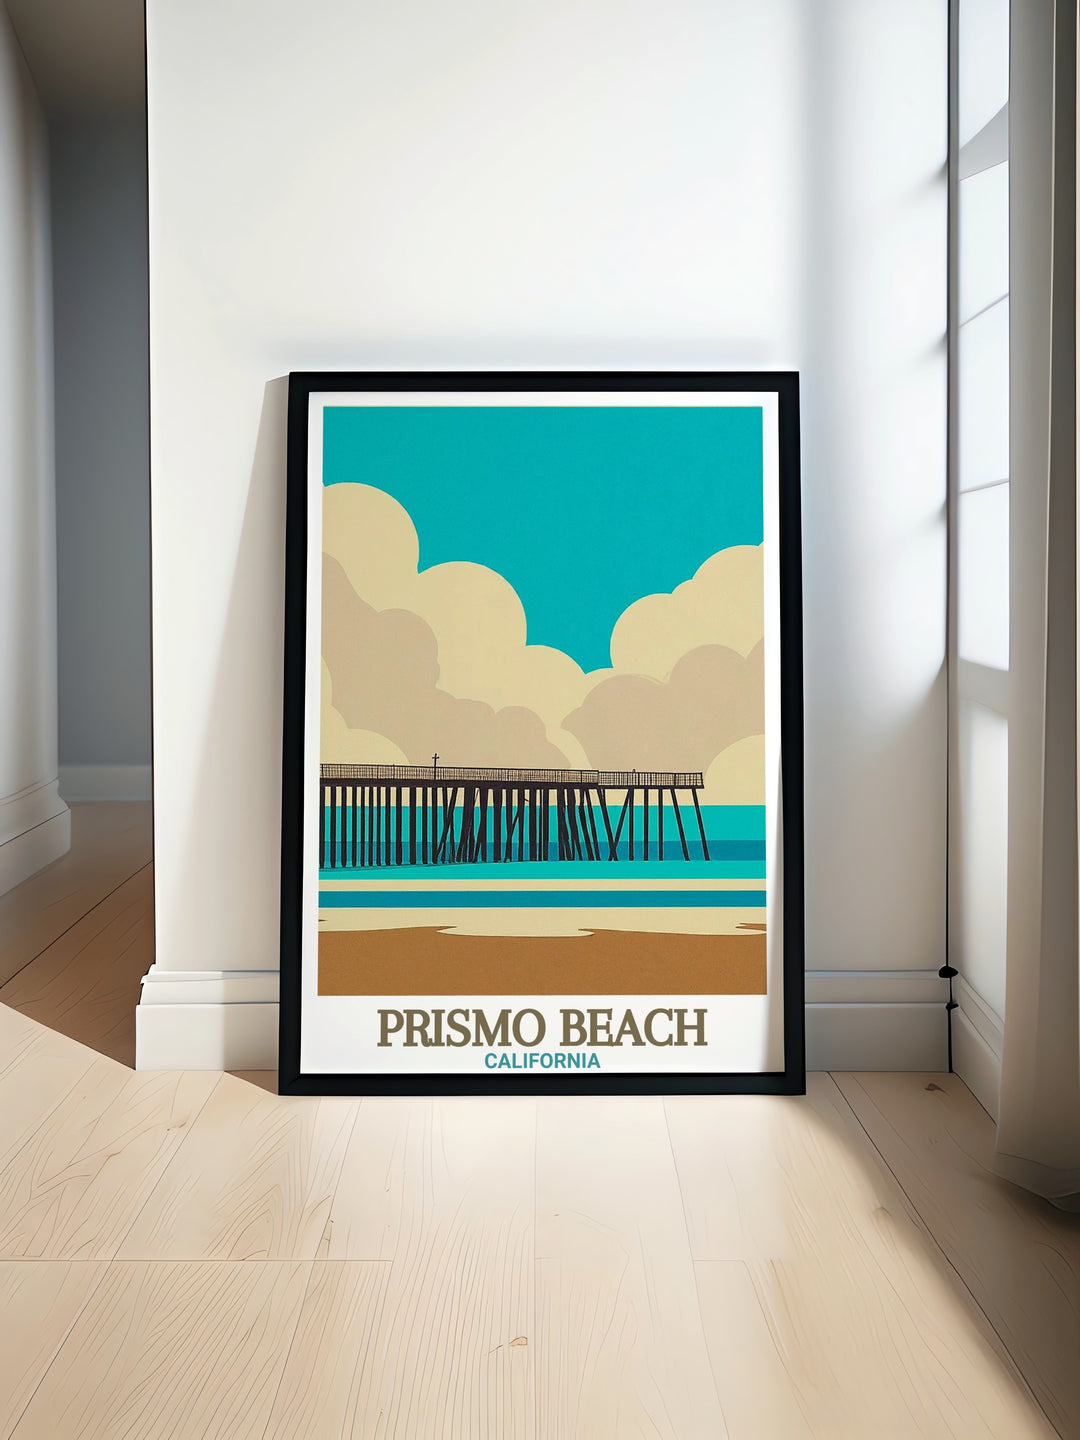 California Poster featuring the stunning Pismo Beach Pier with vibrant colors and exquisite details perfect for home decor and gifts Pismo Beach Pier modern prints included for elegant wall art and nature lovers